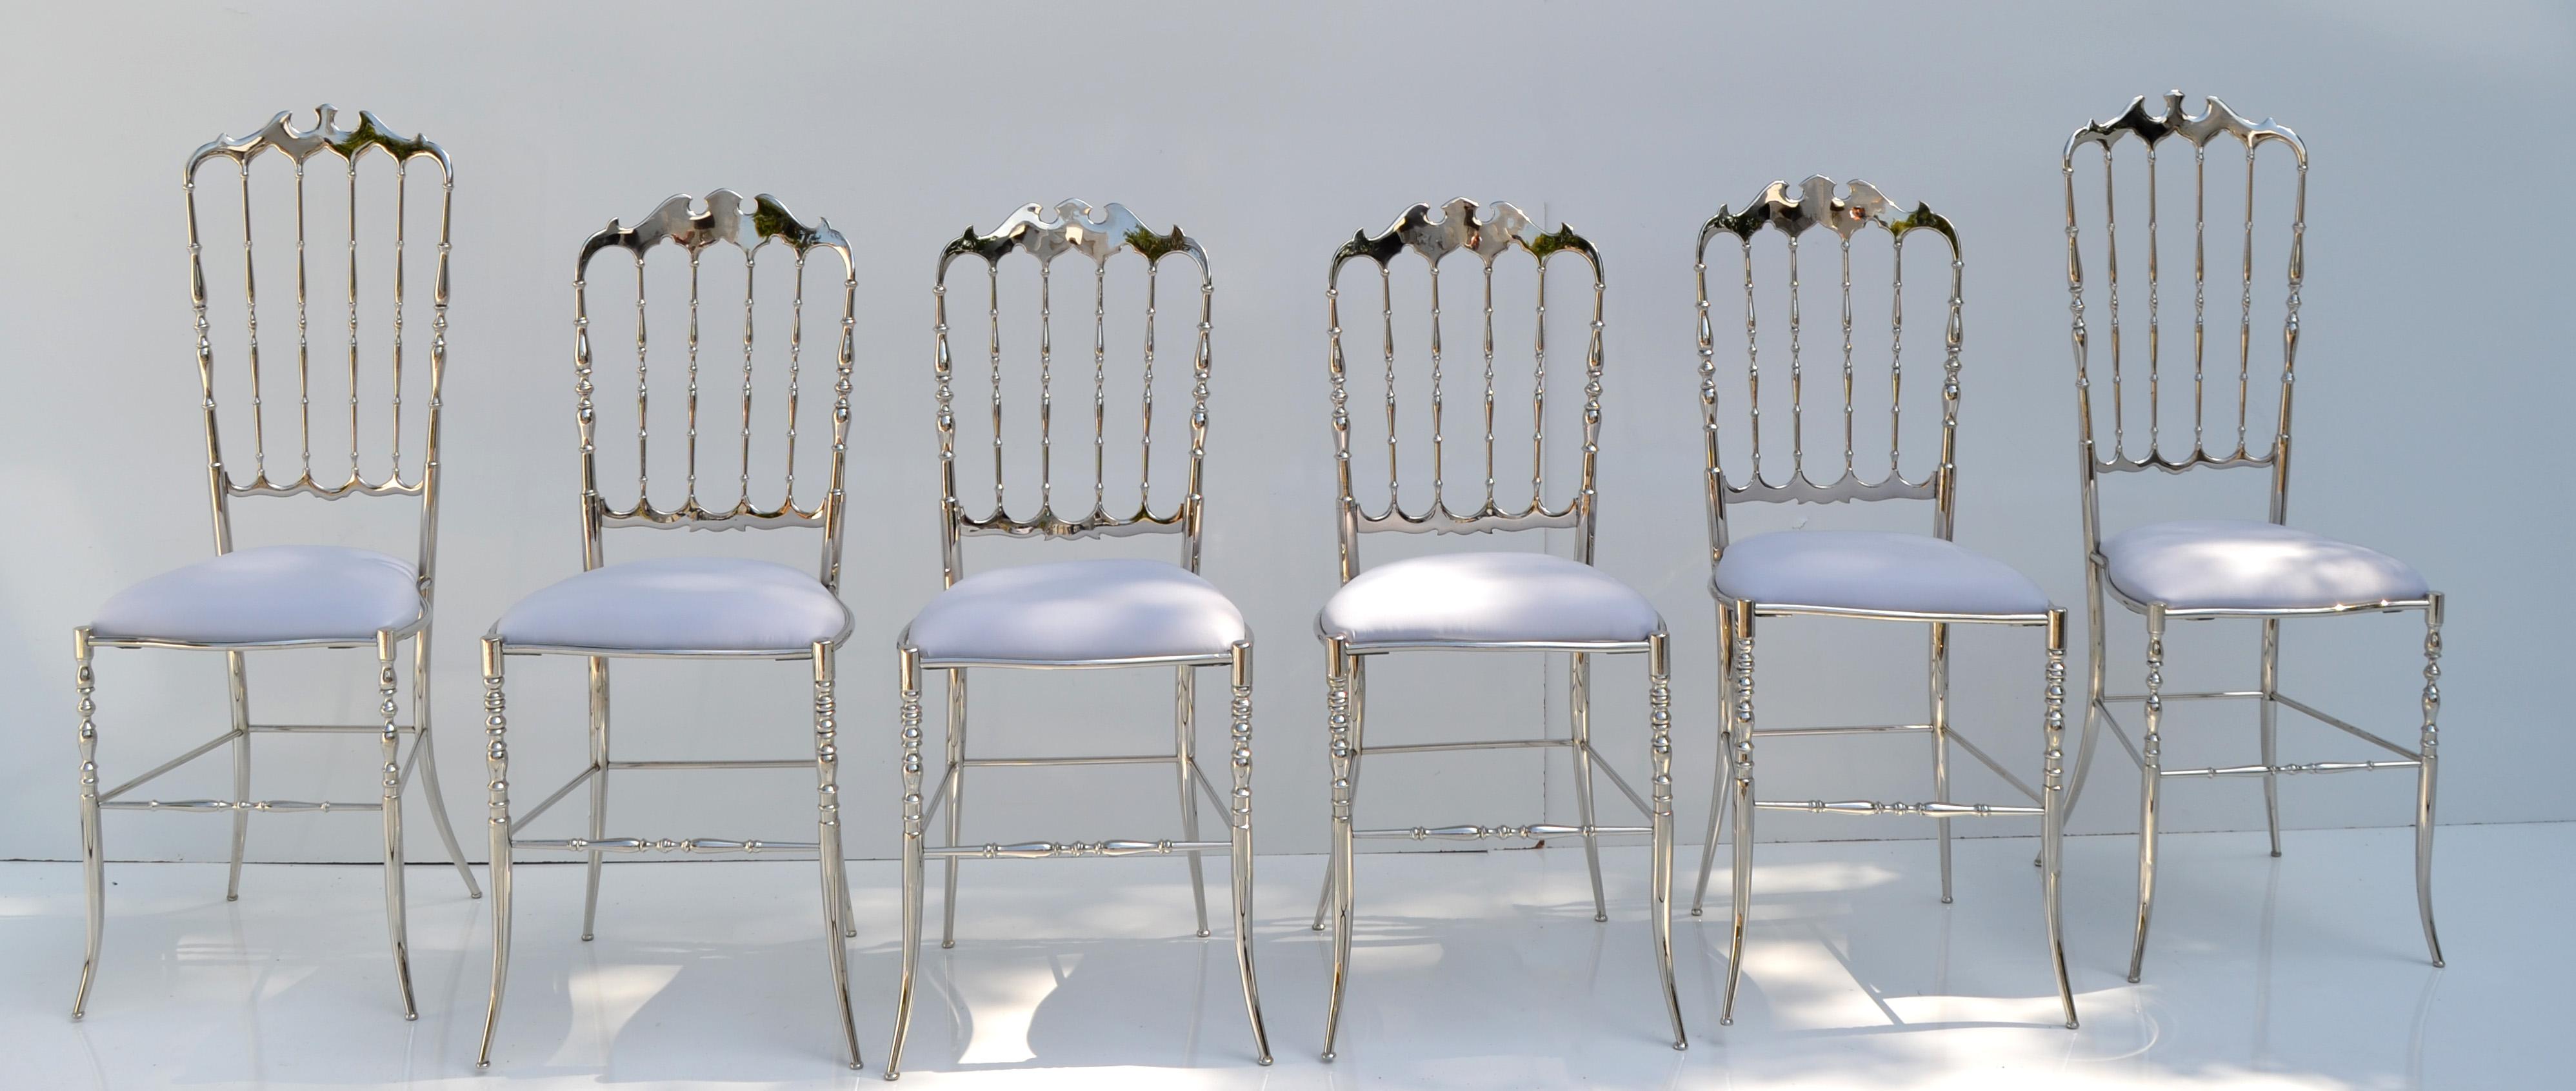 Maison Baccarat Crystal Room Restaurant Style Set of 6 Nickel Plated Chair 9